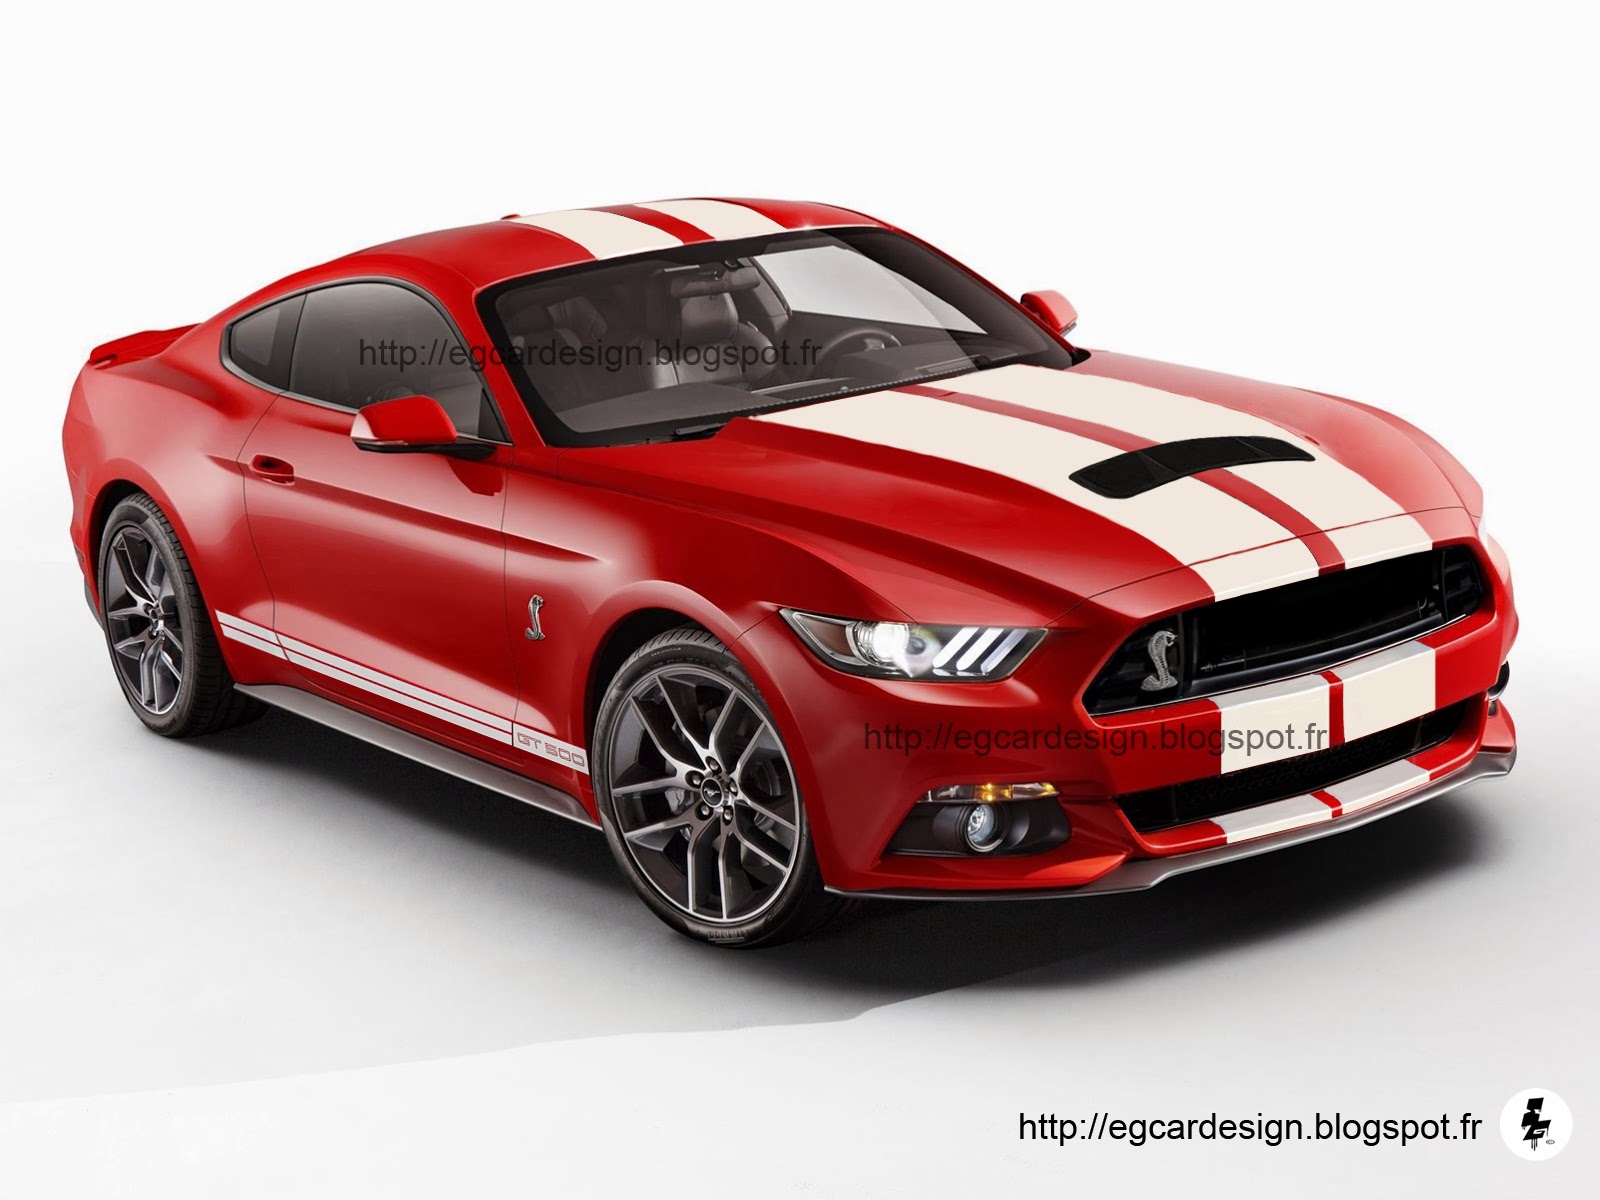 Ford Mustang Shelby Gt500 Cobra HD Wallpaper For Mac Grivu